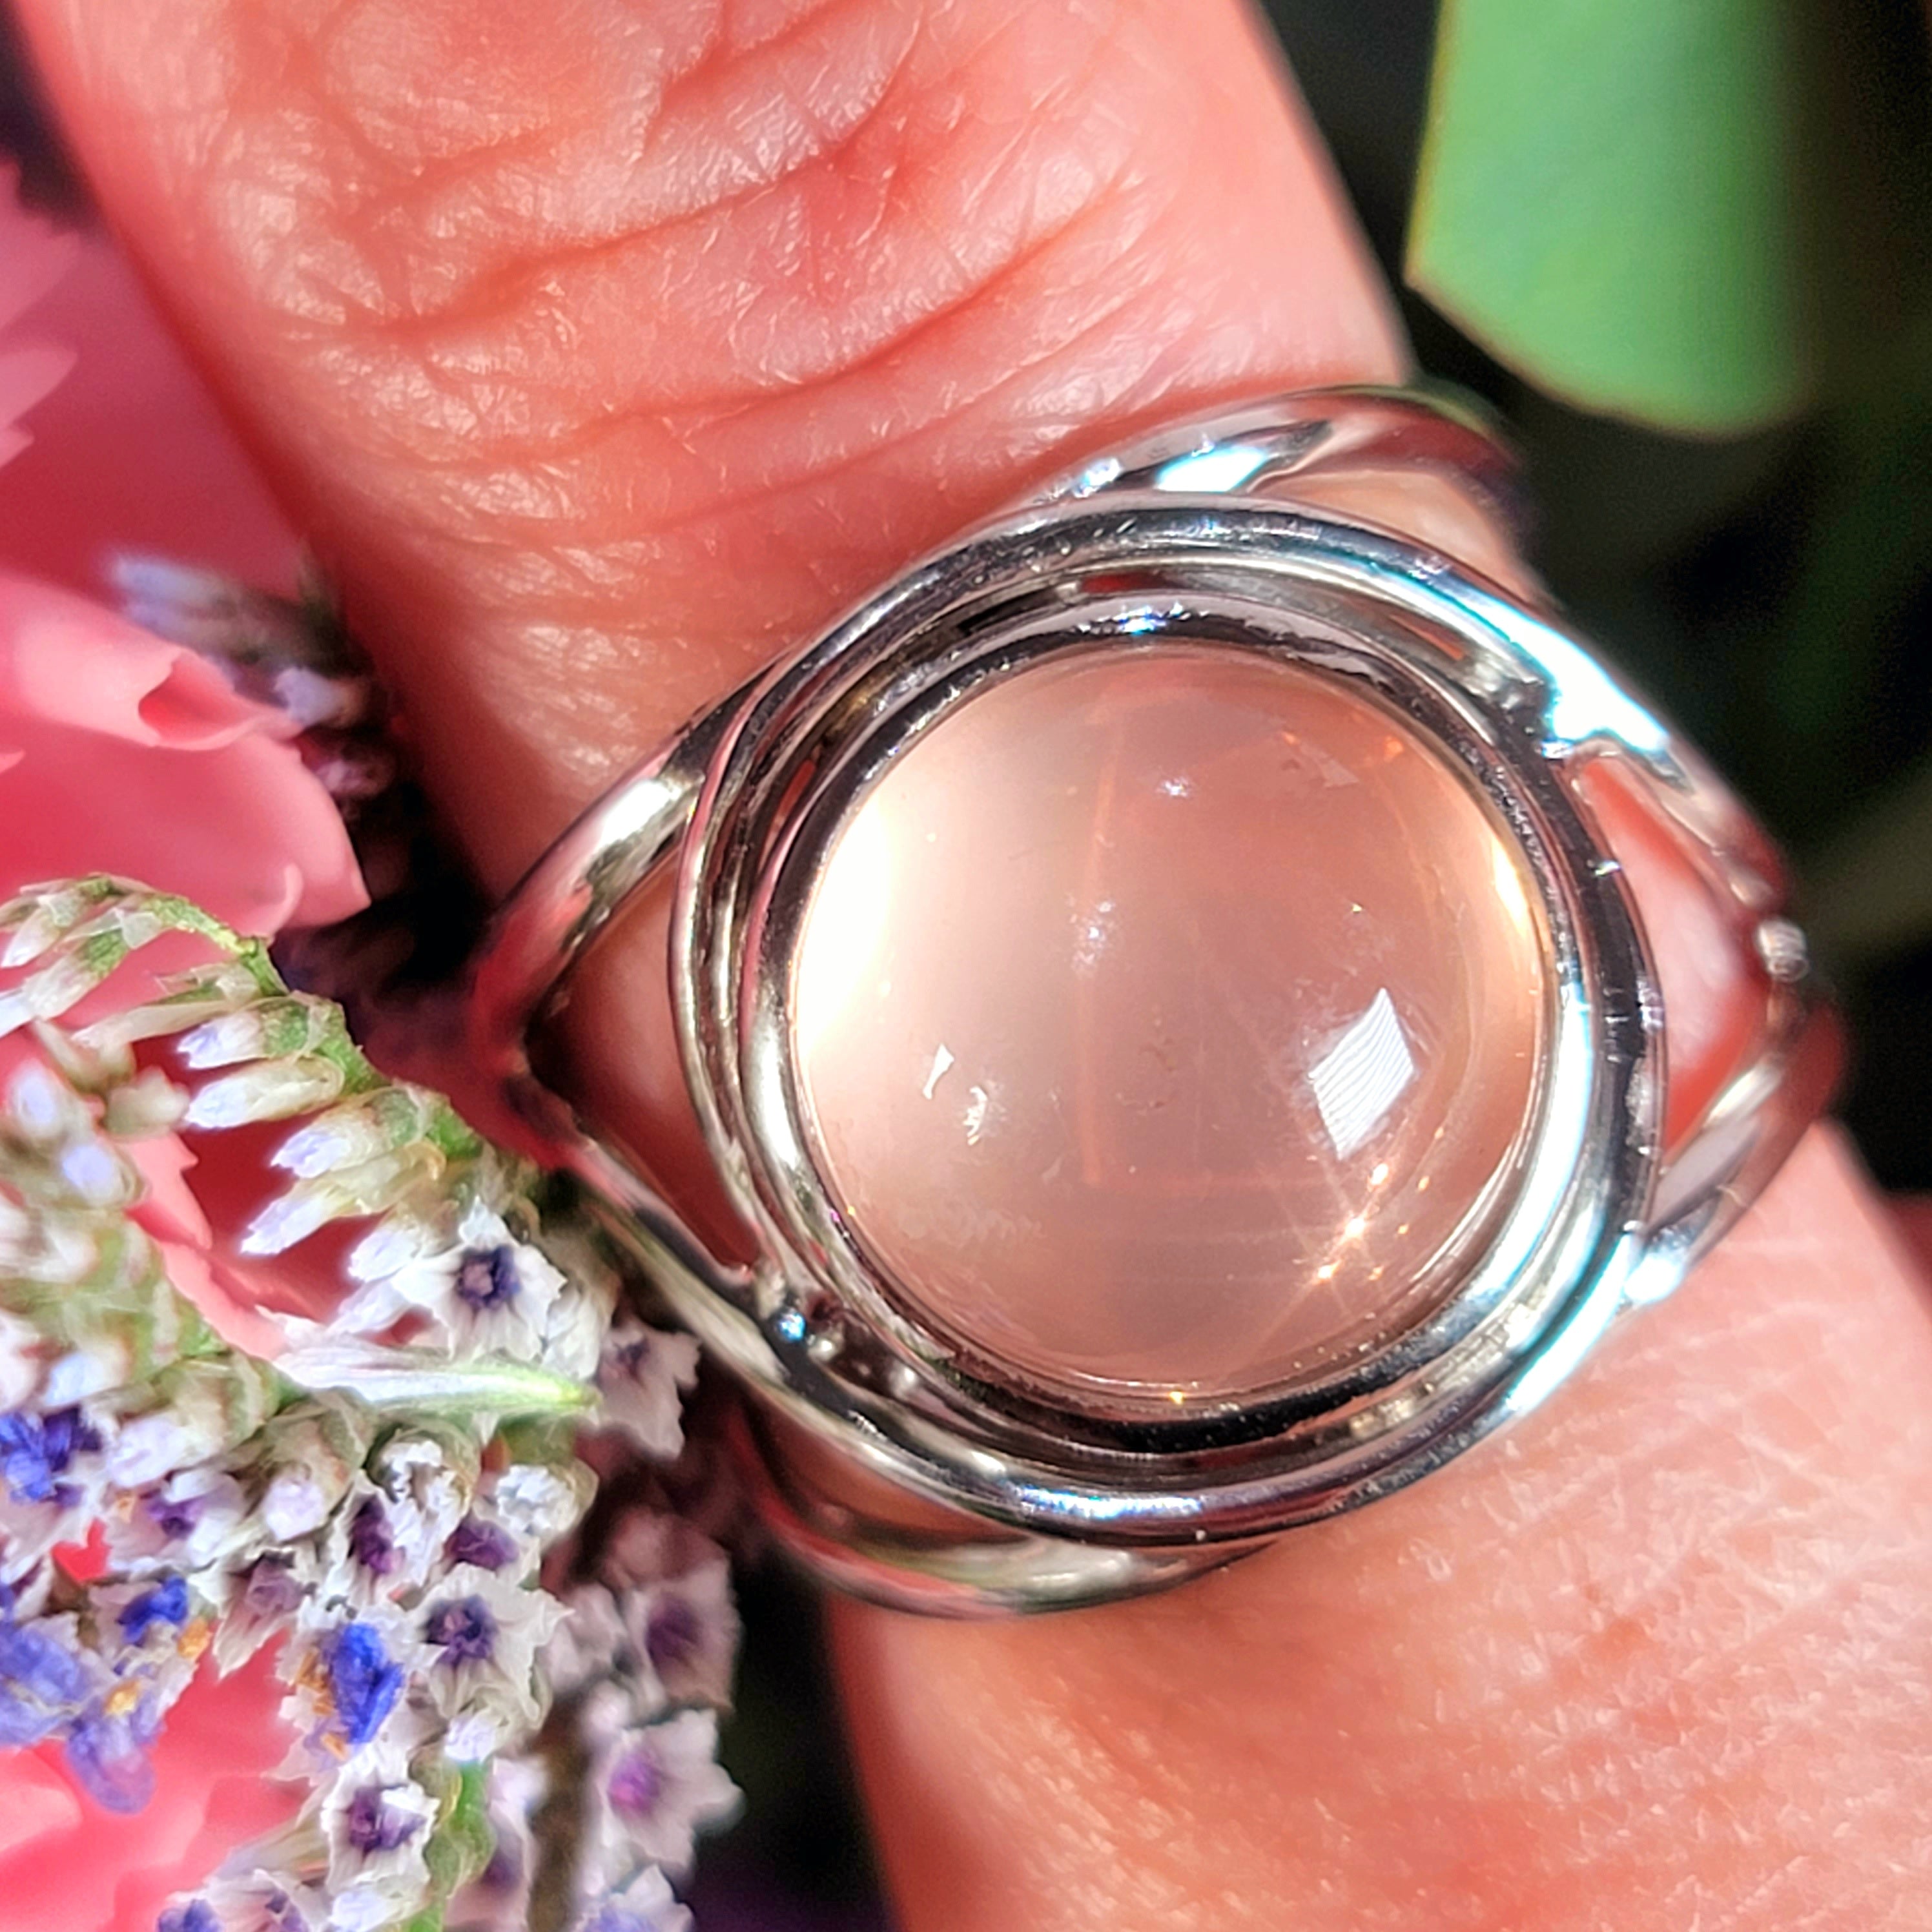 Star Rose Quartz Adjustable Finger Cuff Ring .925 Silver for Compassion and Self Love